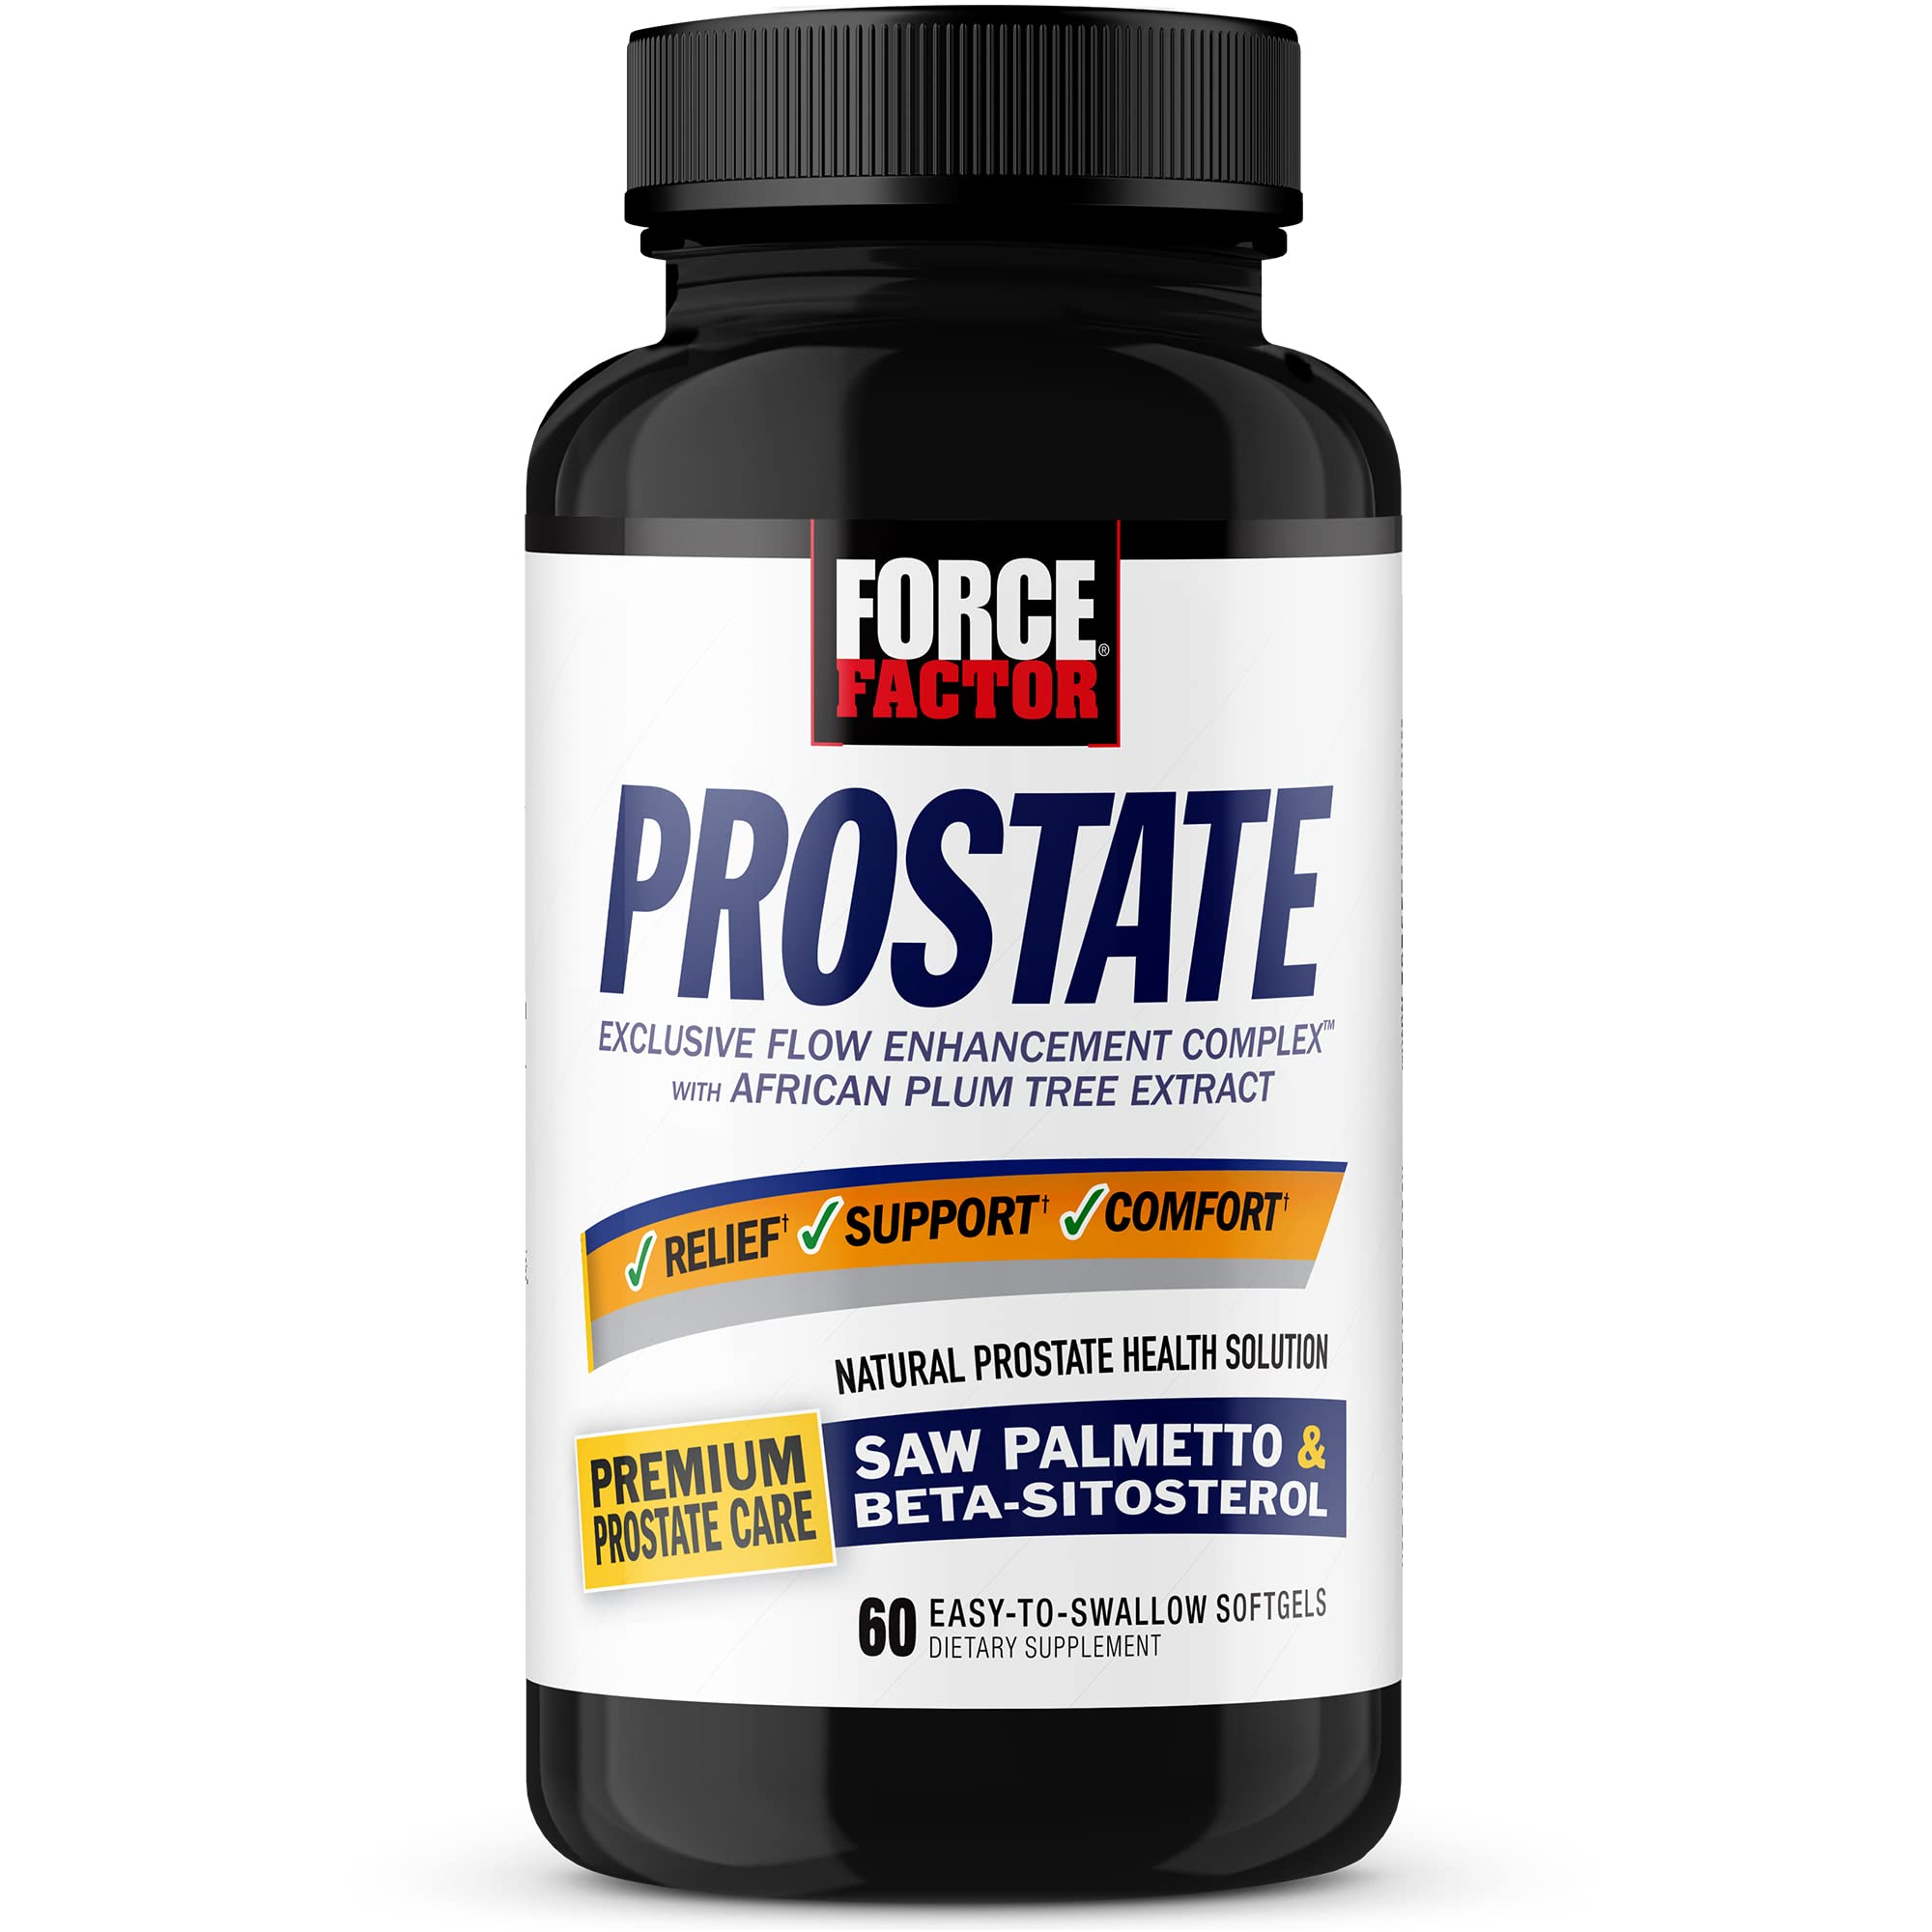 Force Factor Prostate Saw Palmetto and Beta Sitosterol Supplement for Men, Prostate Health Support, Prostate Size Support, Urinary Relief, Bladder Control, Reduce Nighttime Urination, 60 Softgels